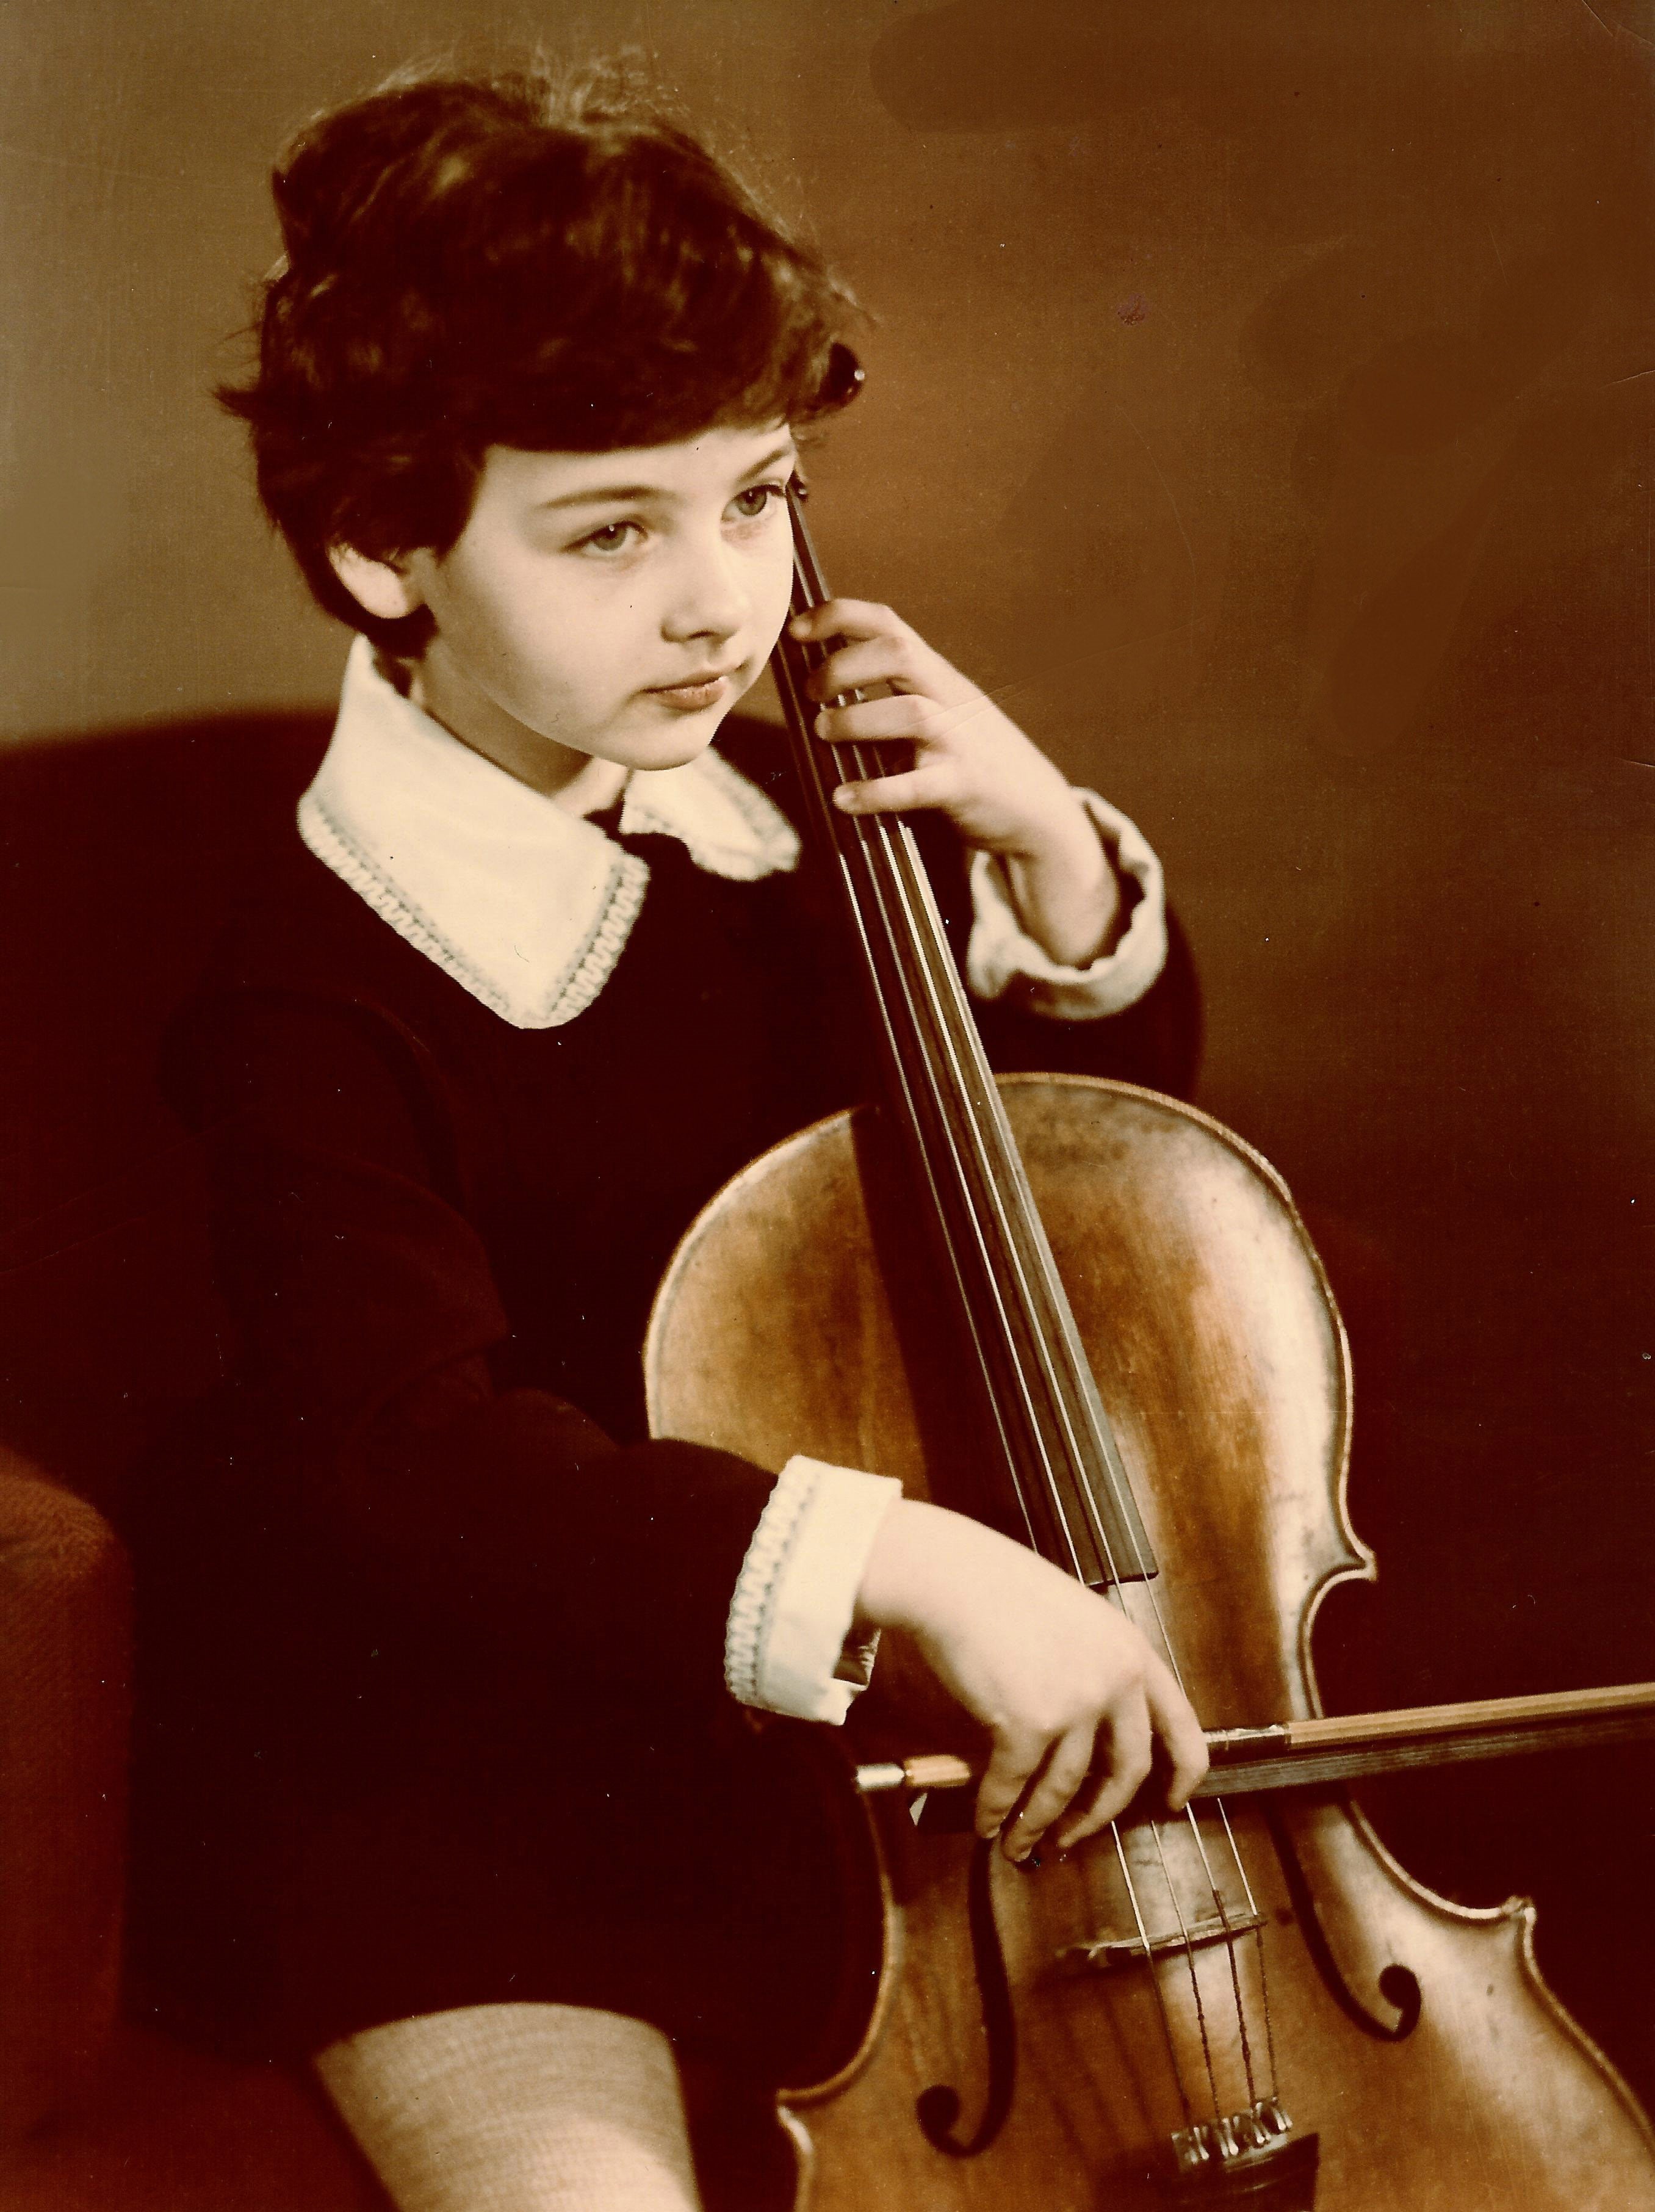 As a child, Victoria, who played the cello, pursued a career in classical music and gained a merit-based scholarship to a prestigious school.